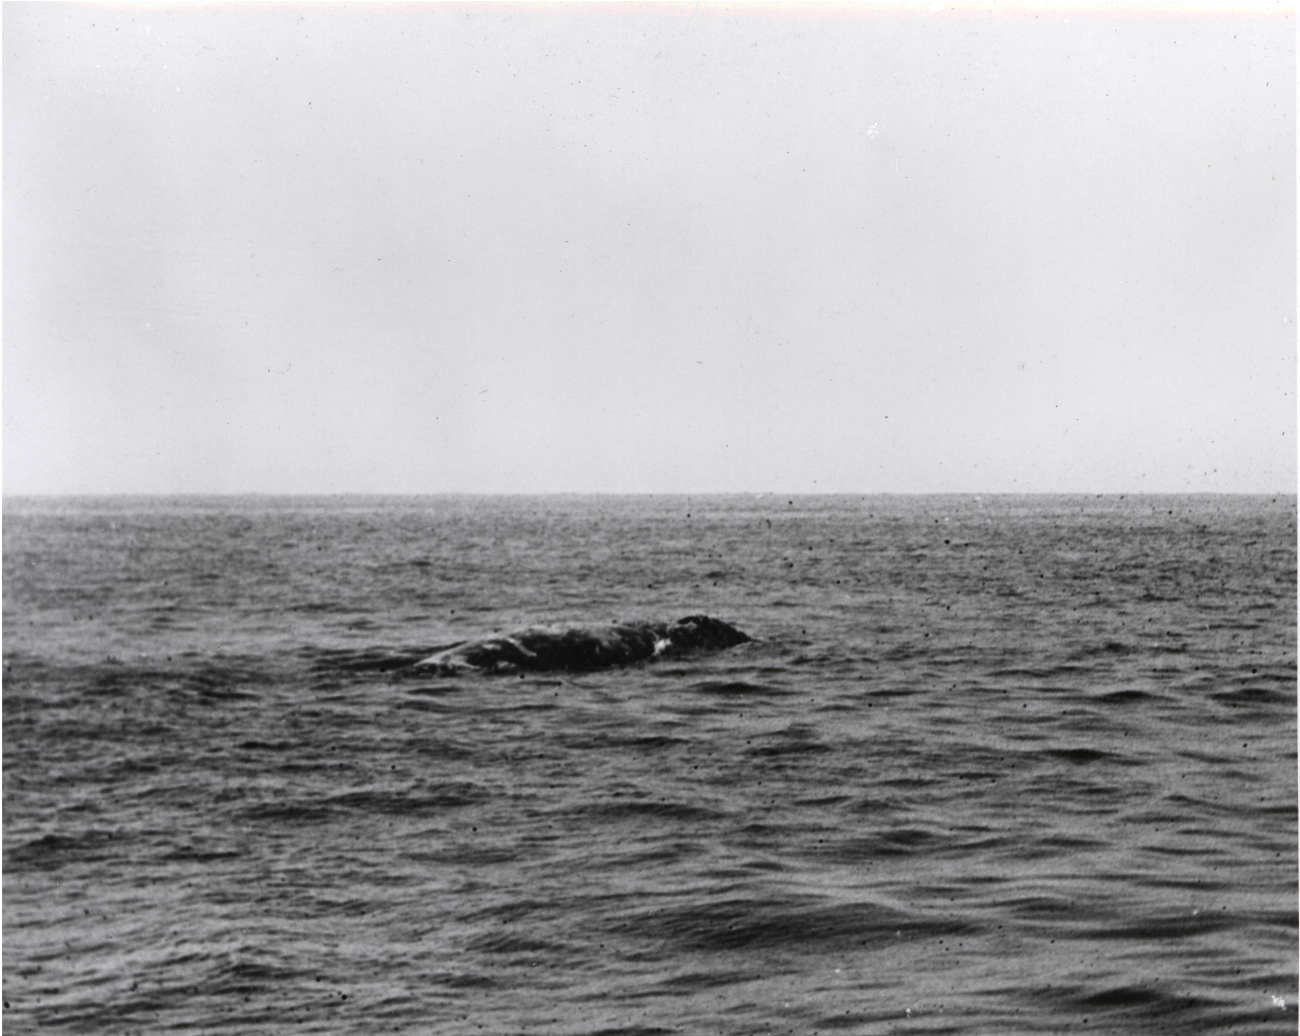 A gray whale on the surface